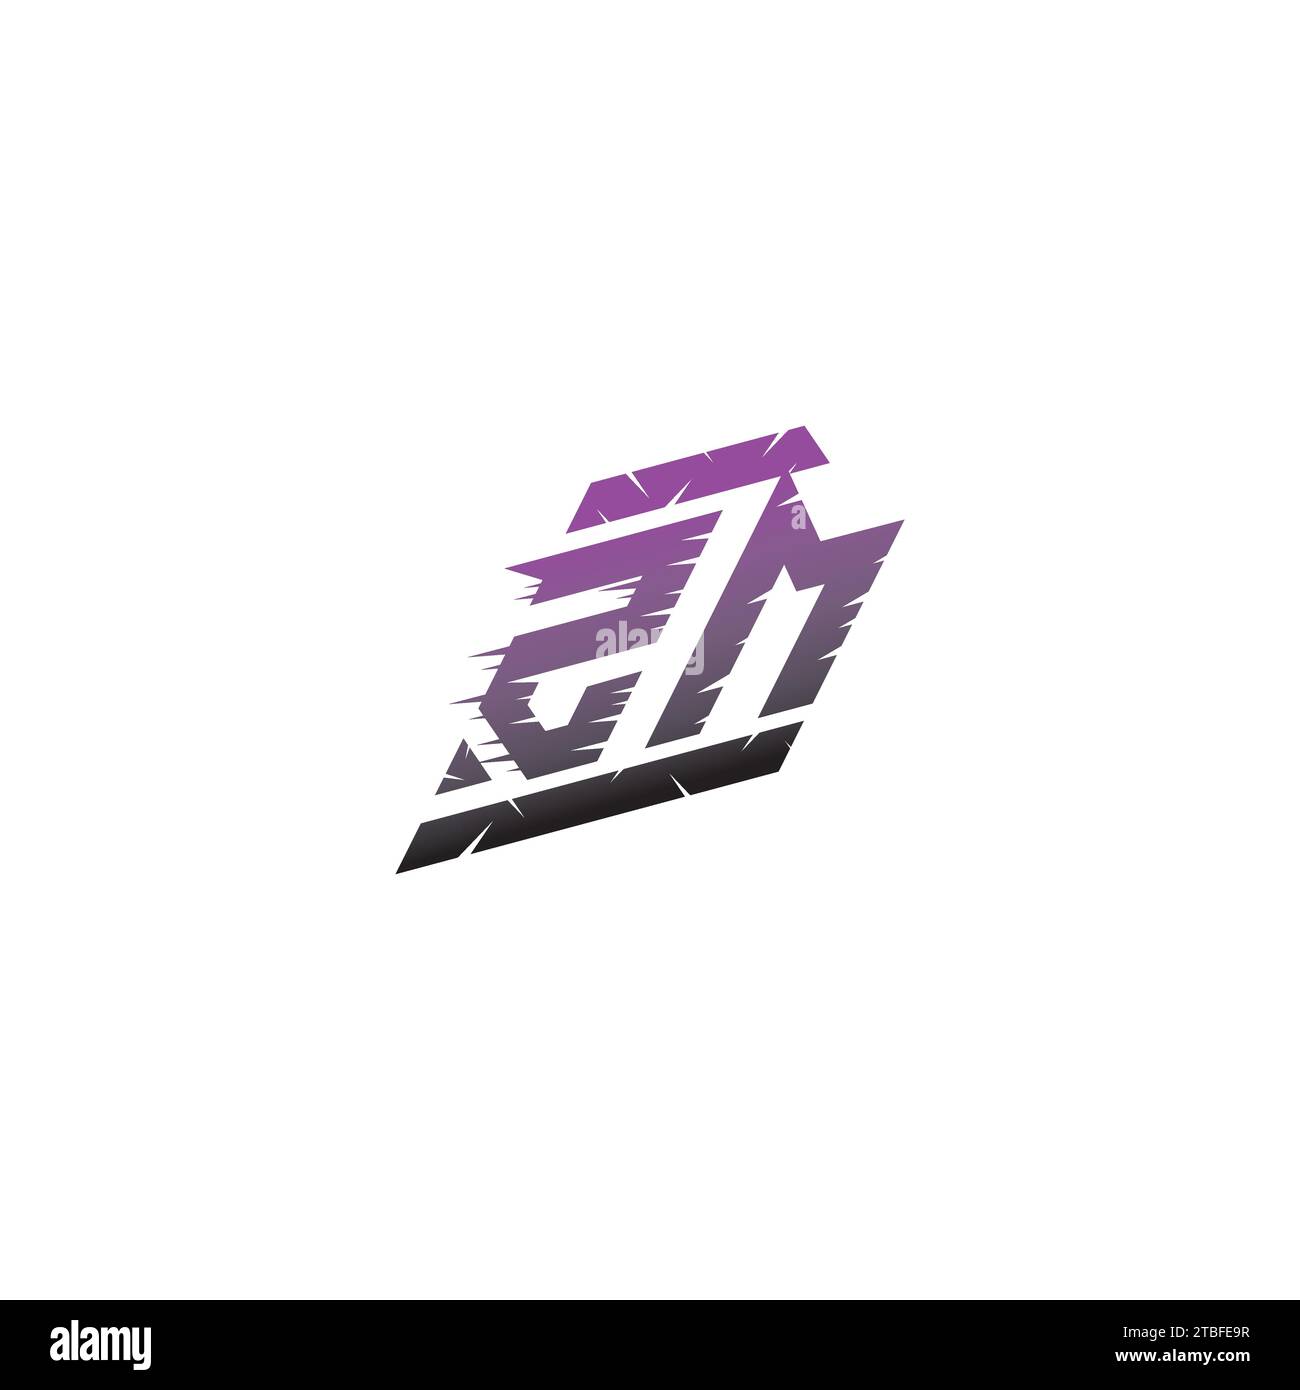 ZM initial esport logo inspiration ideas for gaming team, youtube, twitch Stock Vector